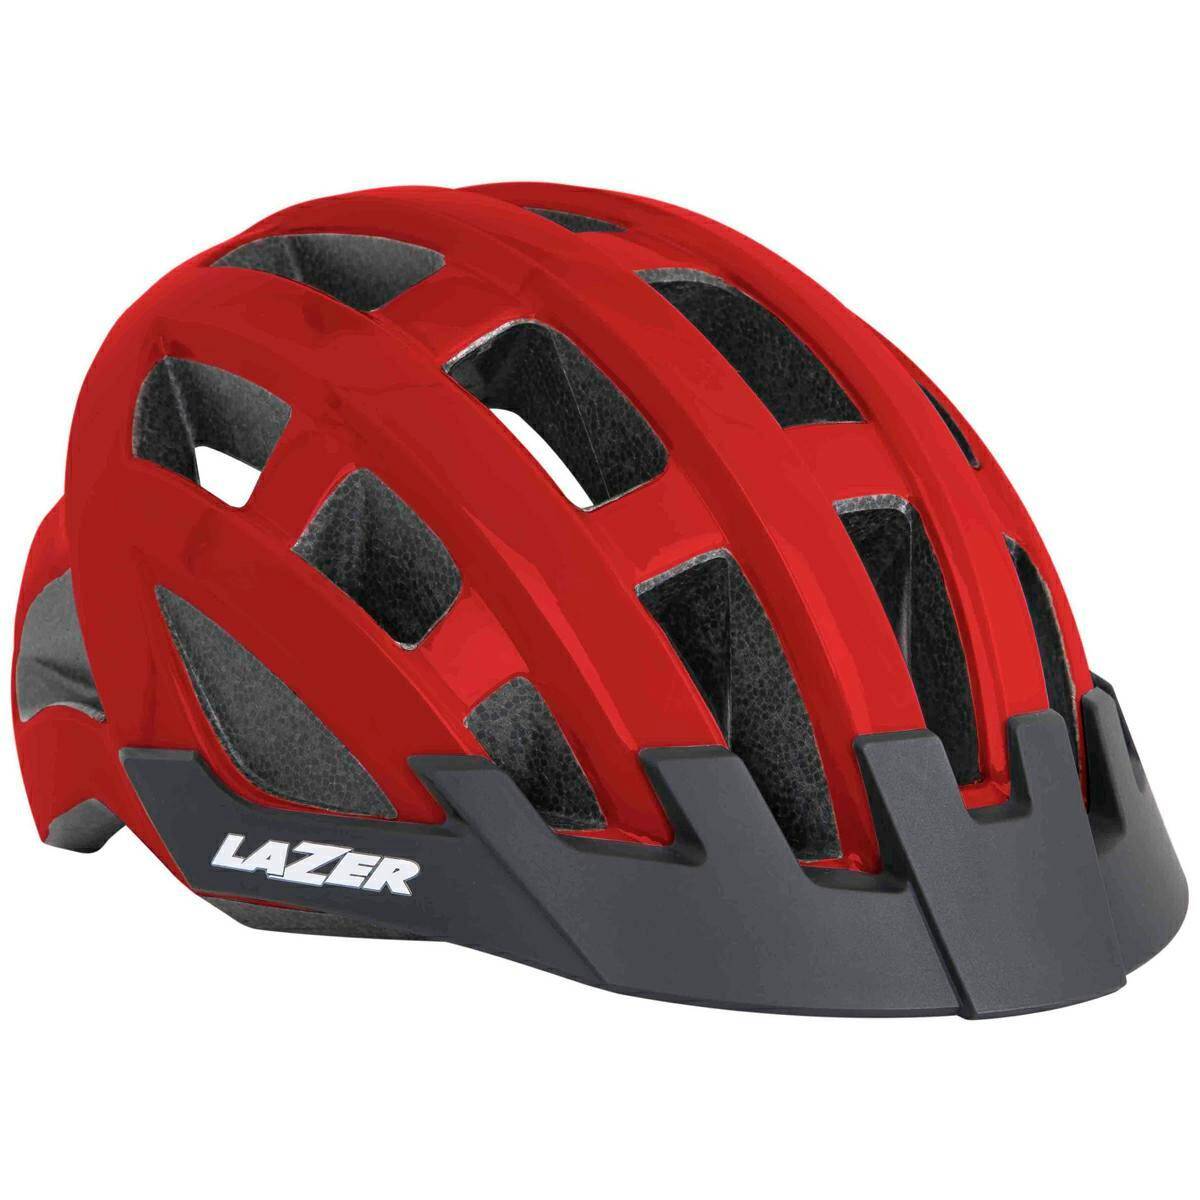 Kask Lazer Compact Red 54-61 cm